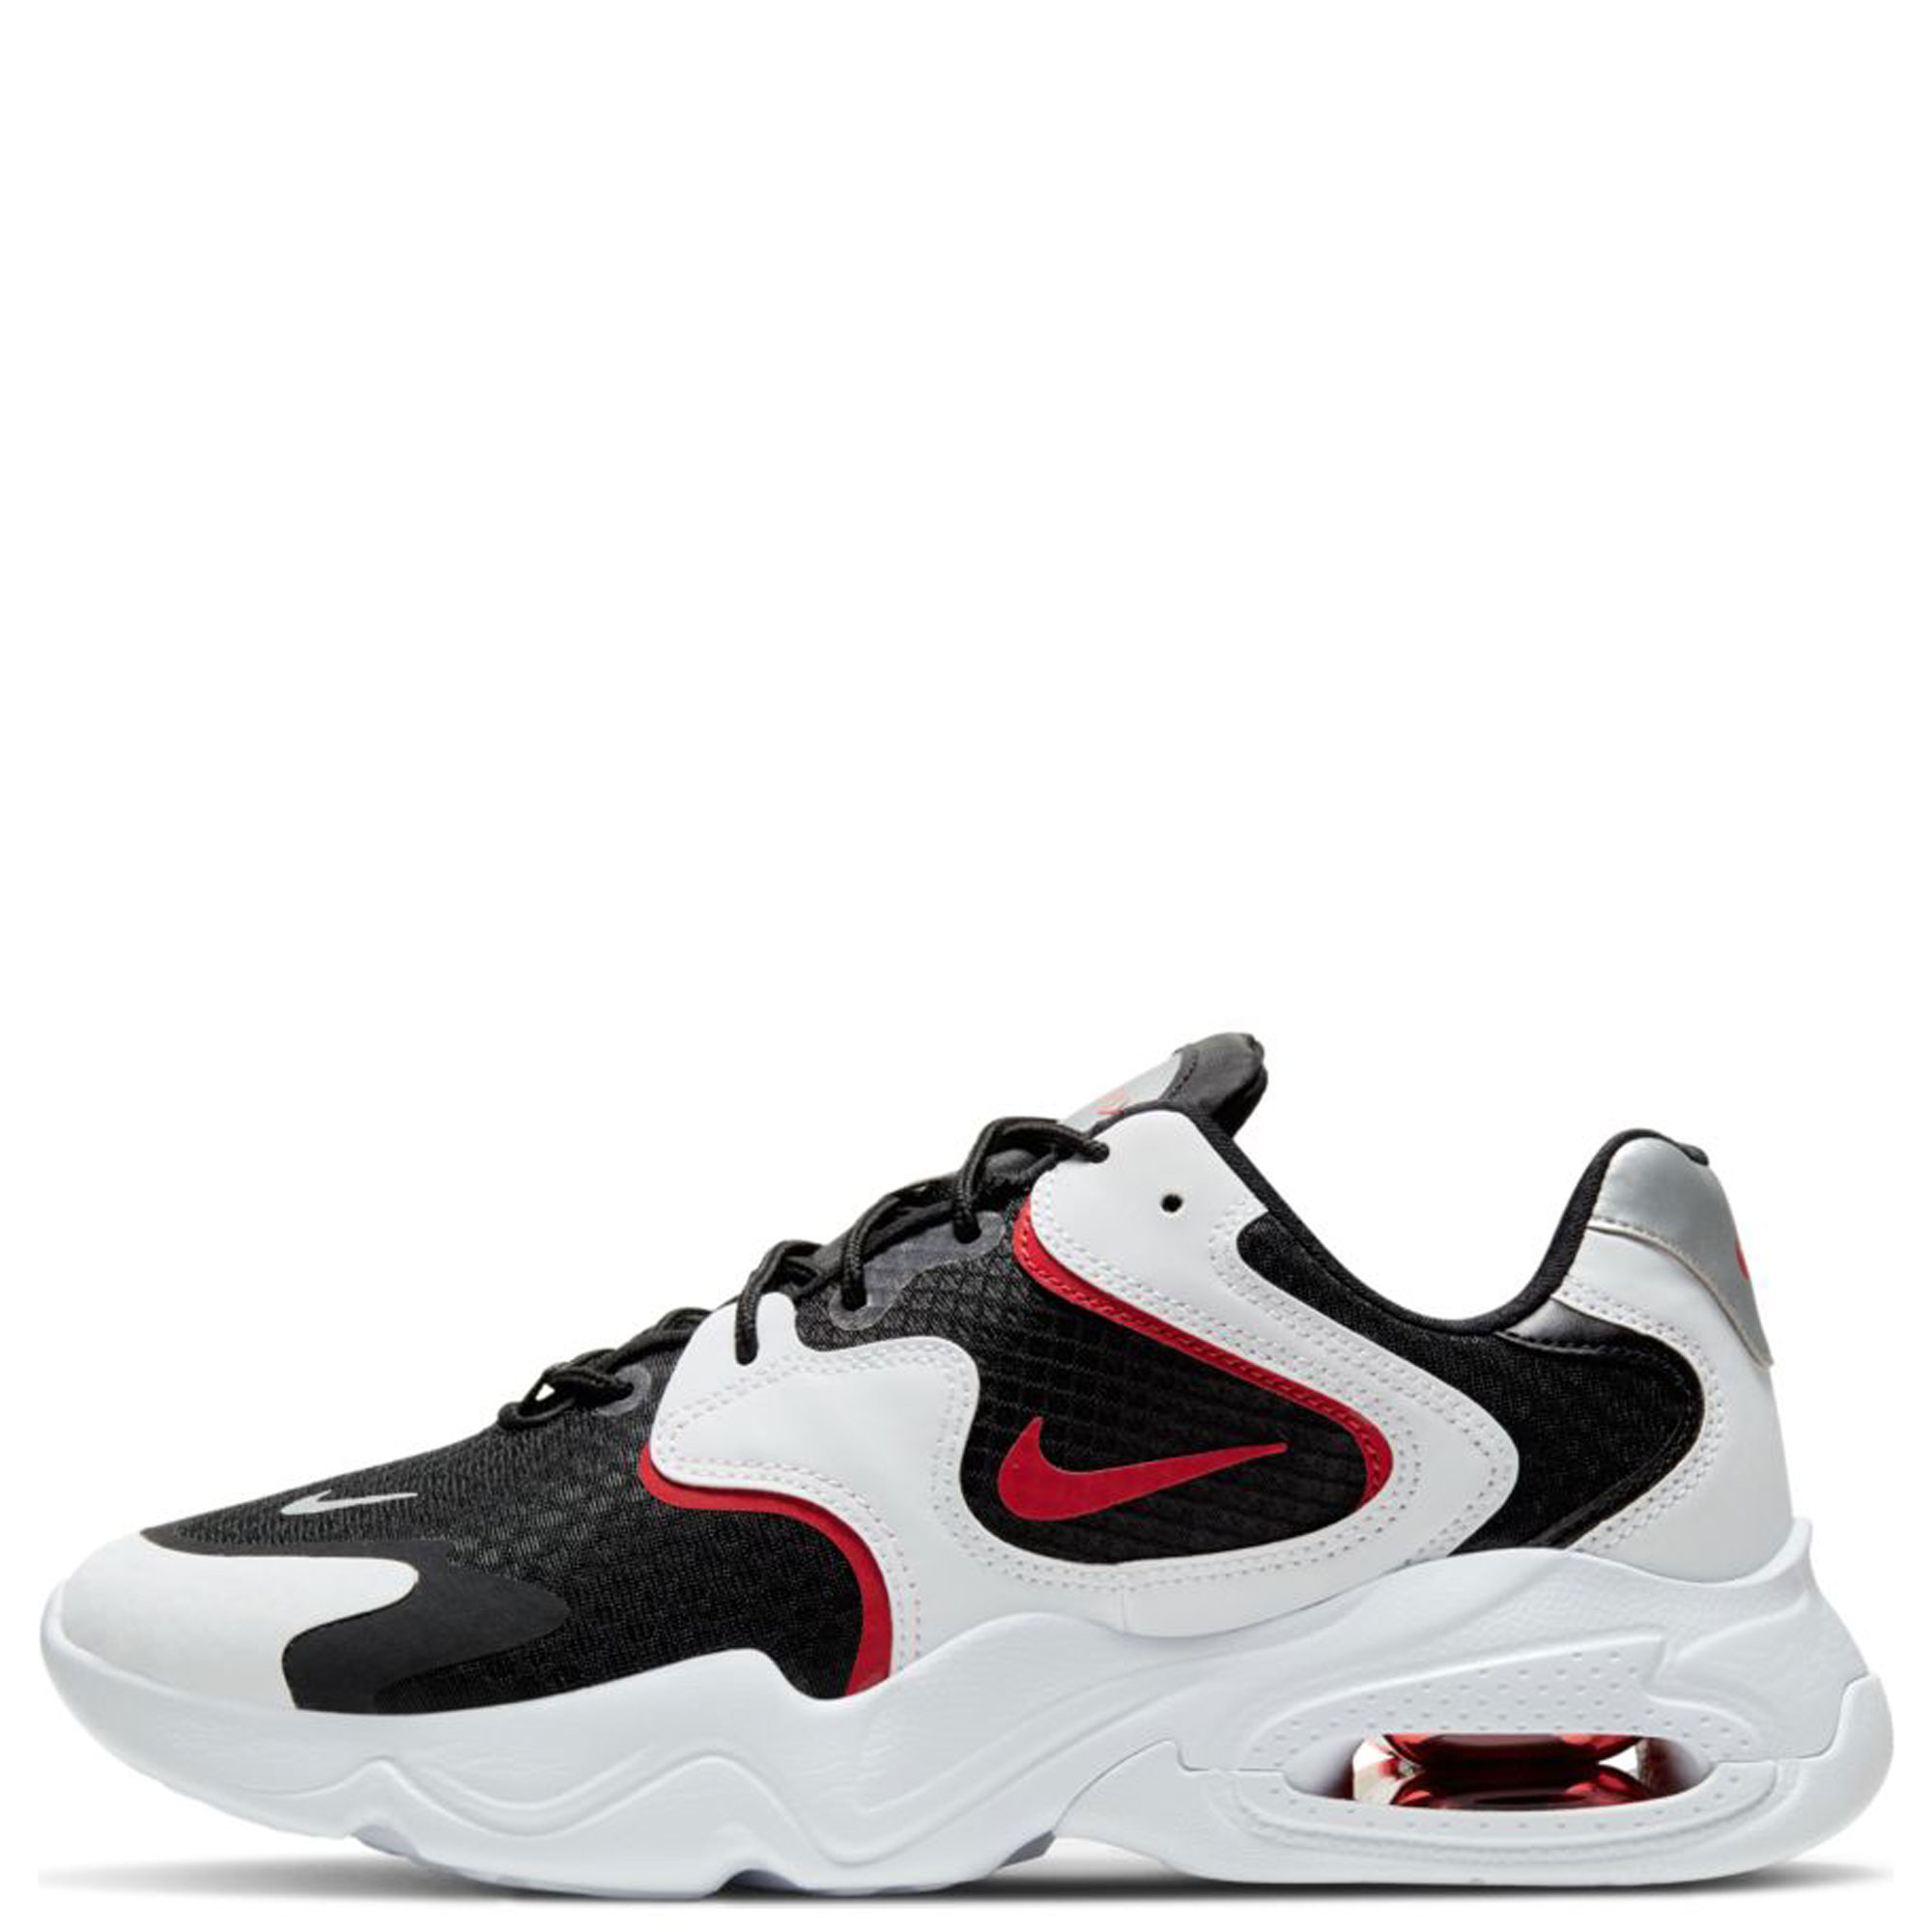 red black and white air max